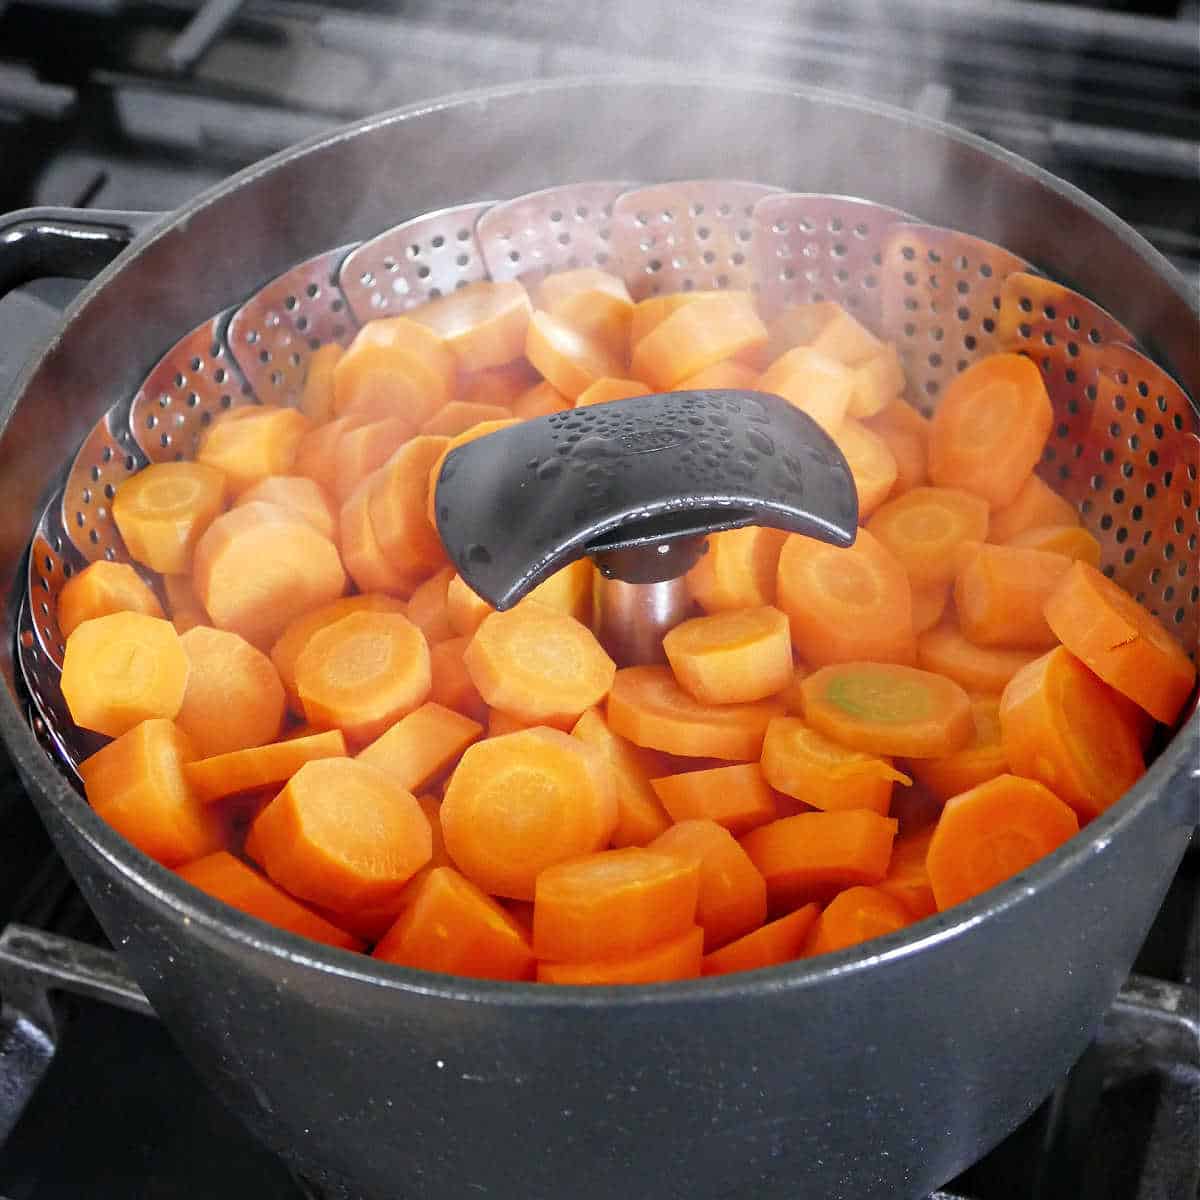 carrot slices steaming in a basket in a pot on the stove